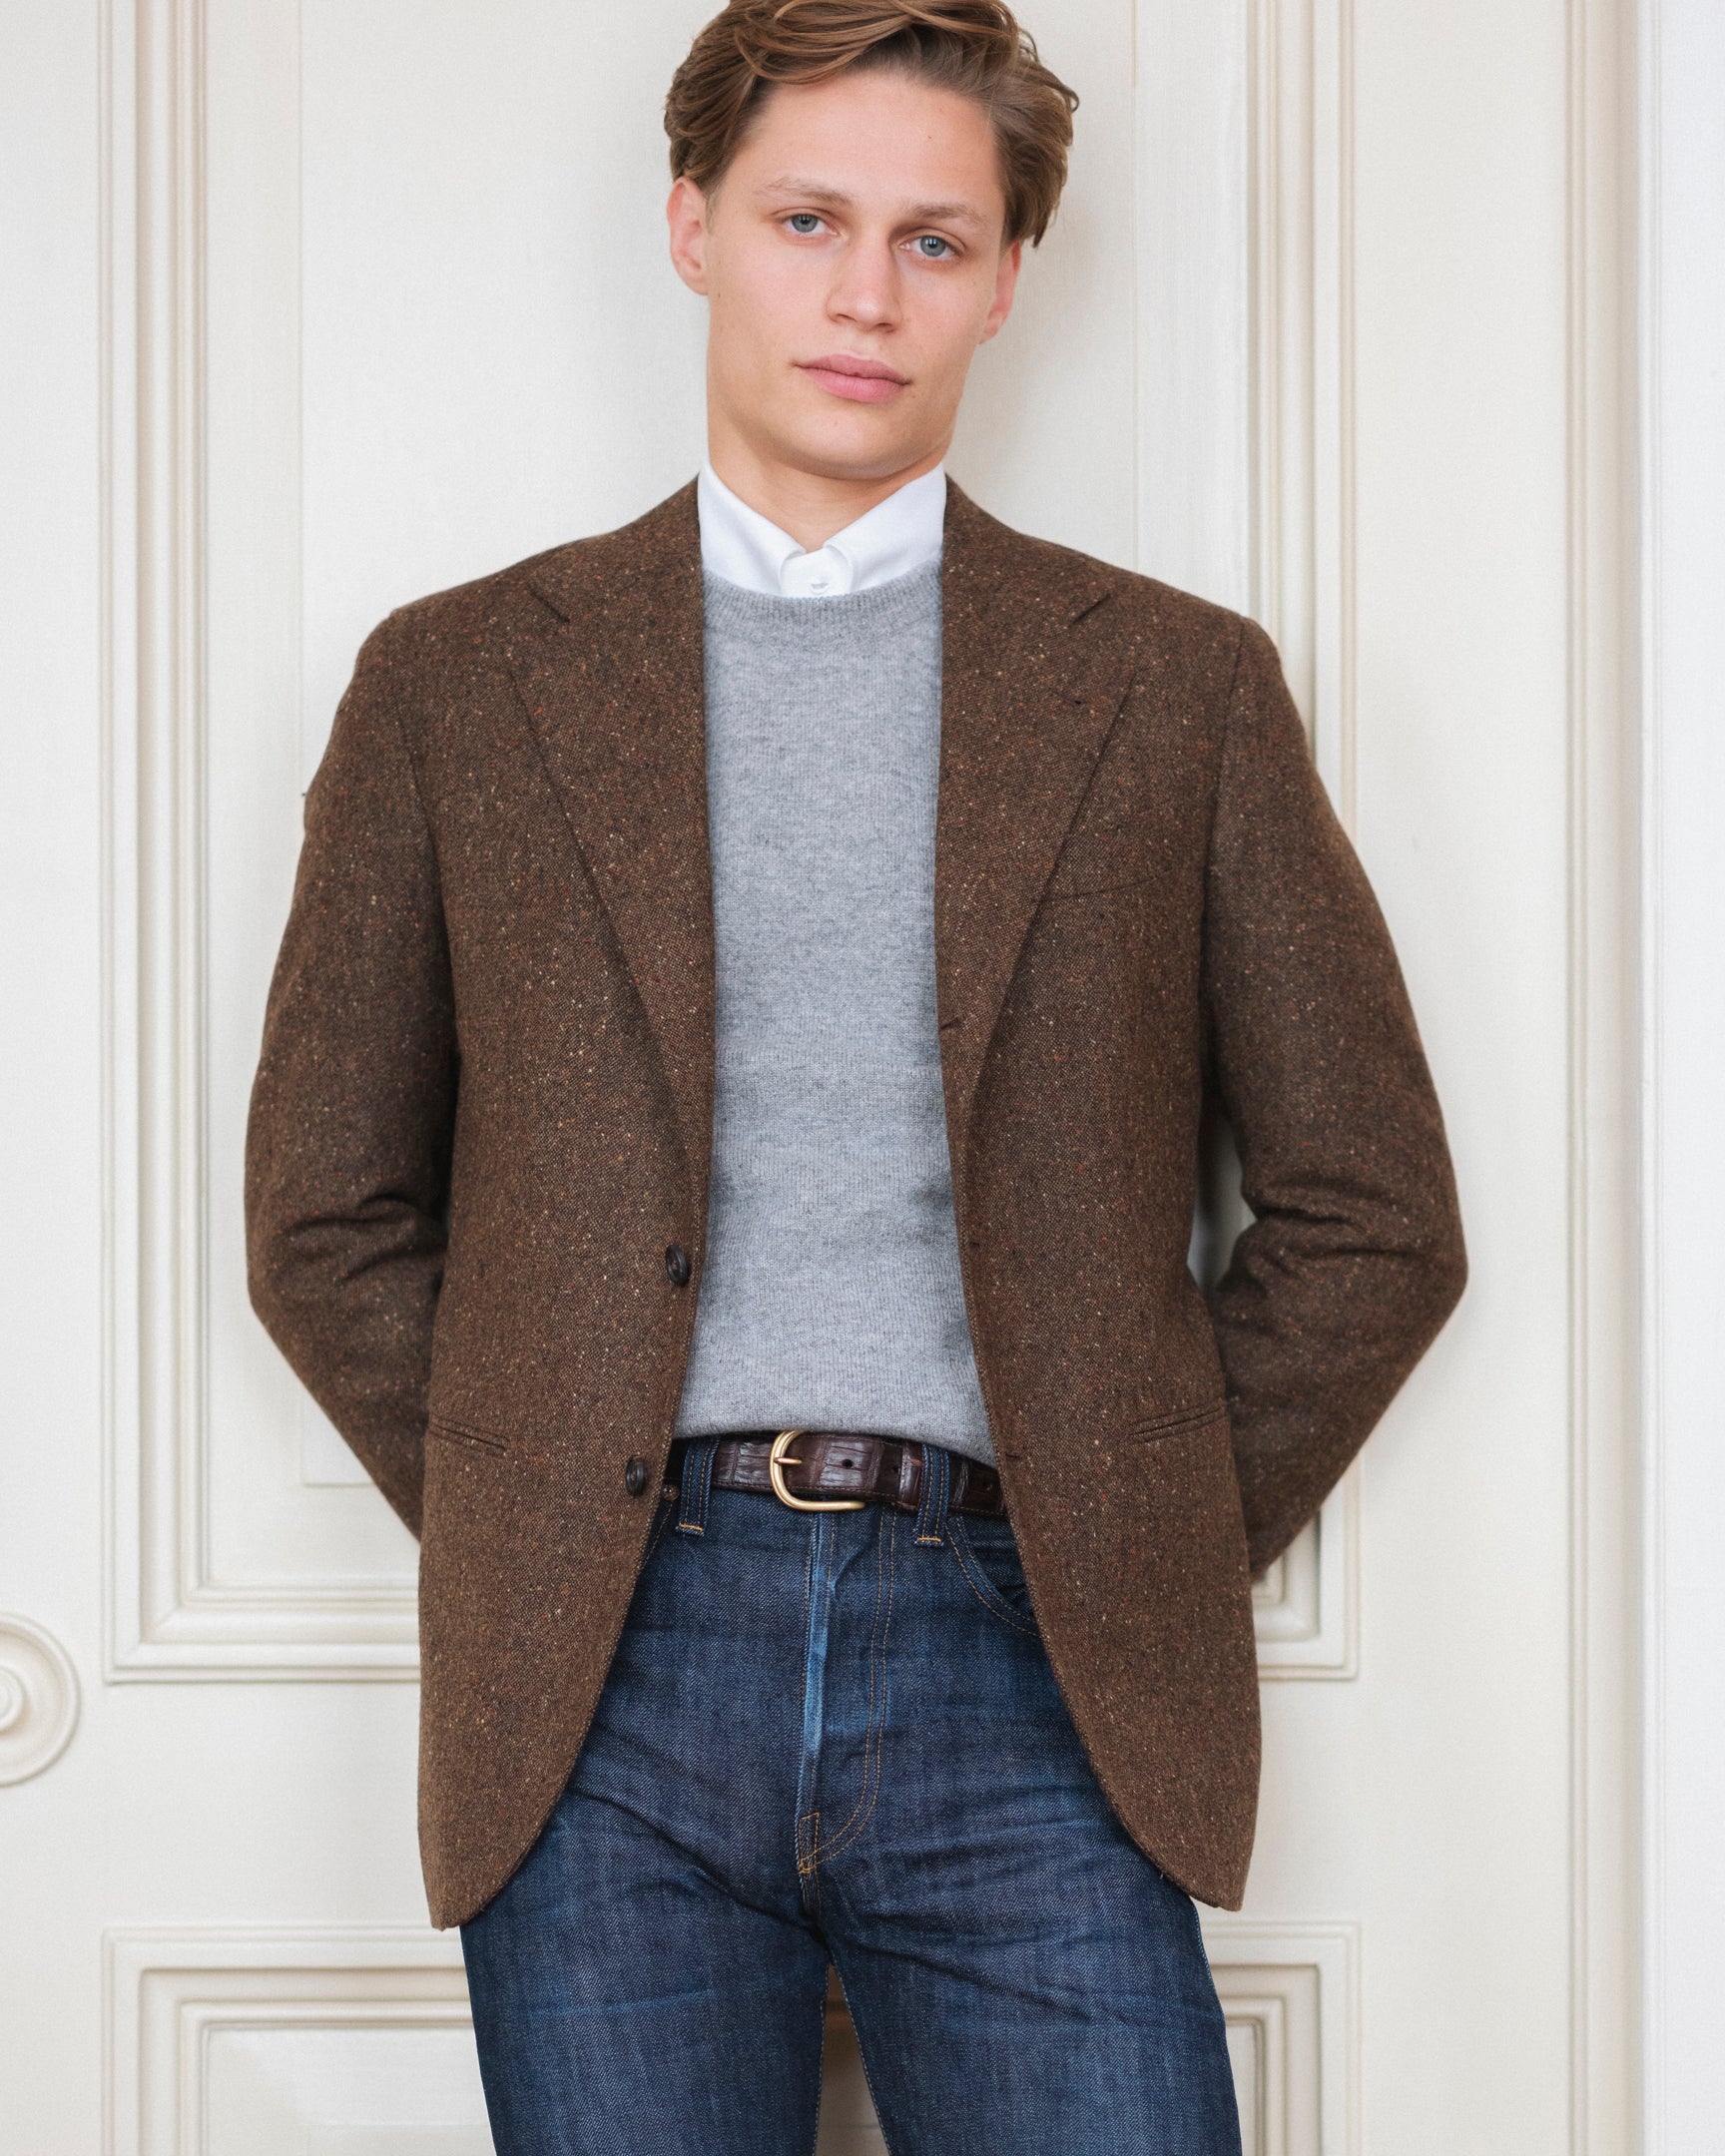 Man wearing a pair of raw denim jeans, white shirt, light grey crewneck sweater and a brown Donegal tweed sport coat